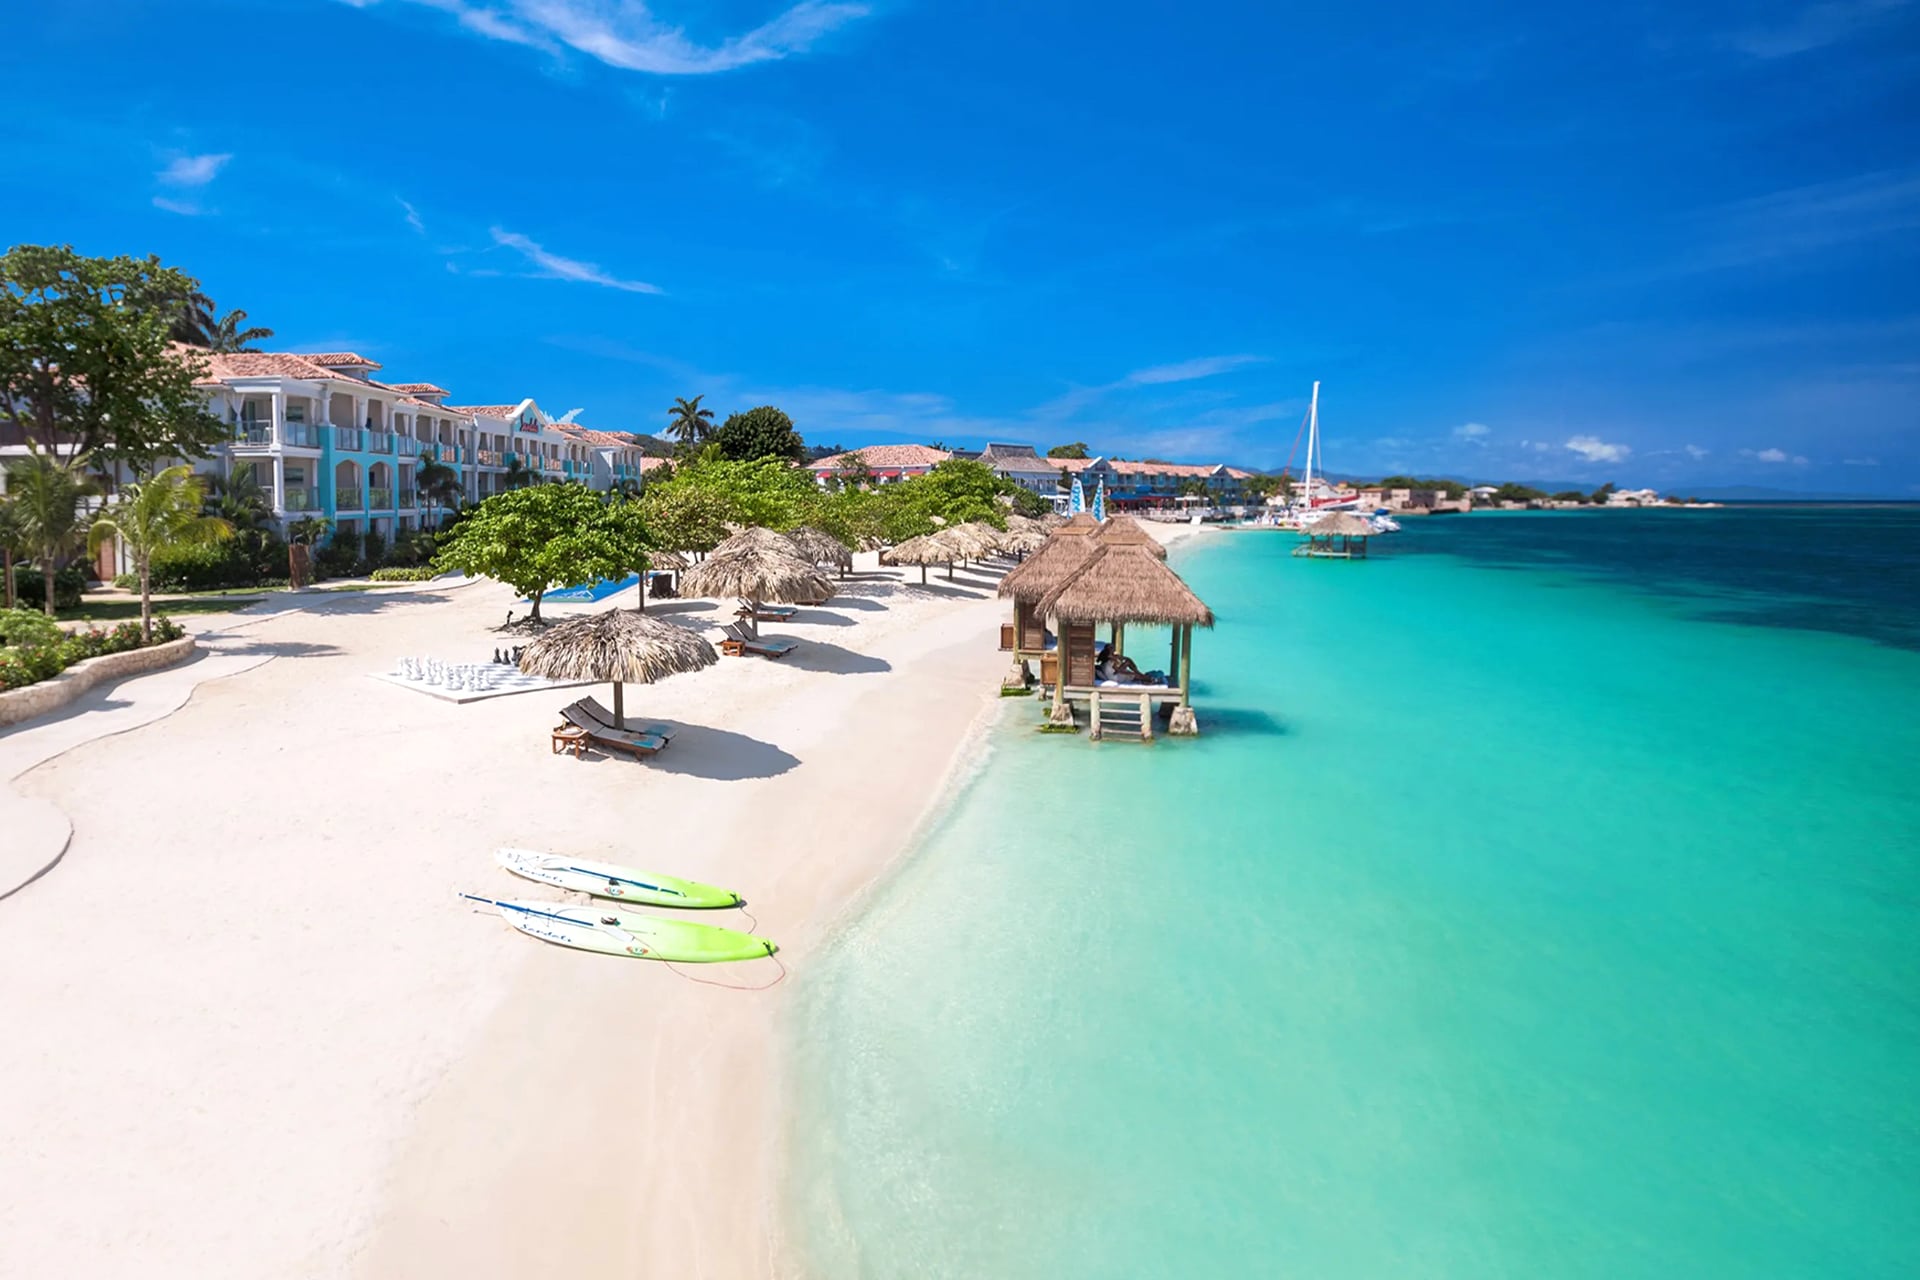 Montego Bay all inclusive resorts